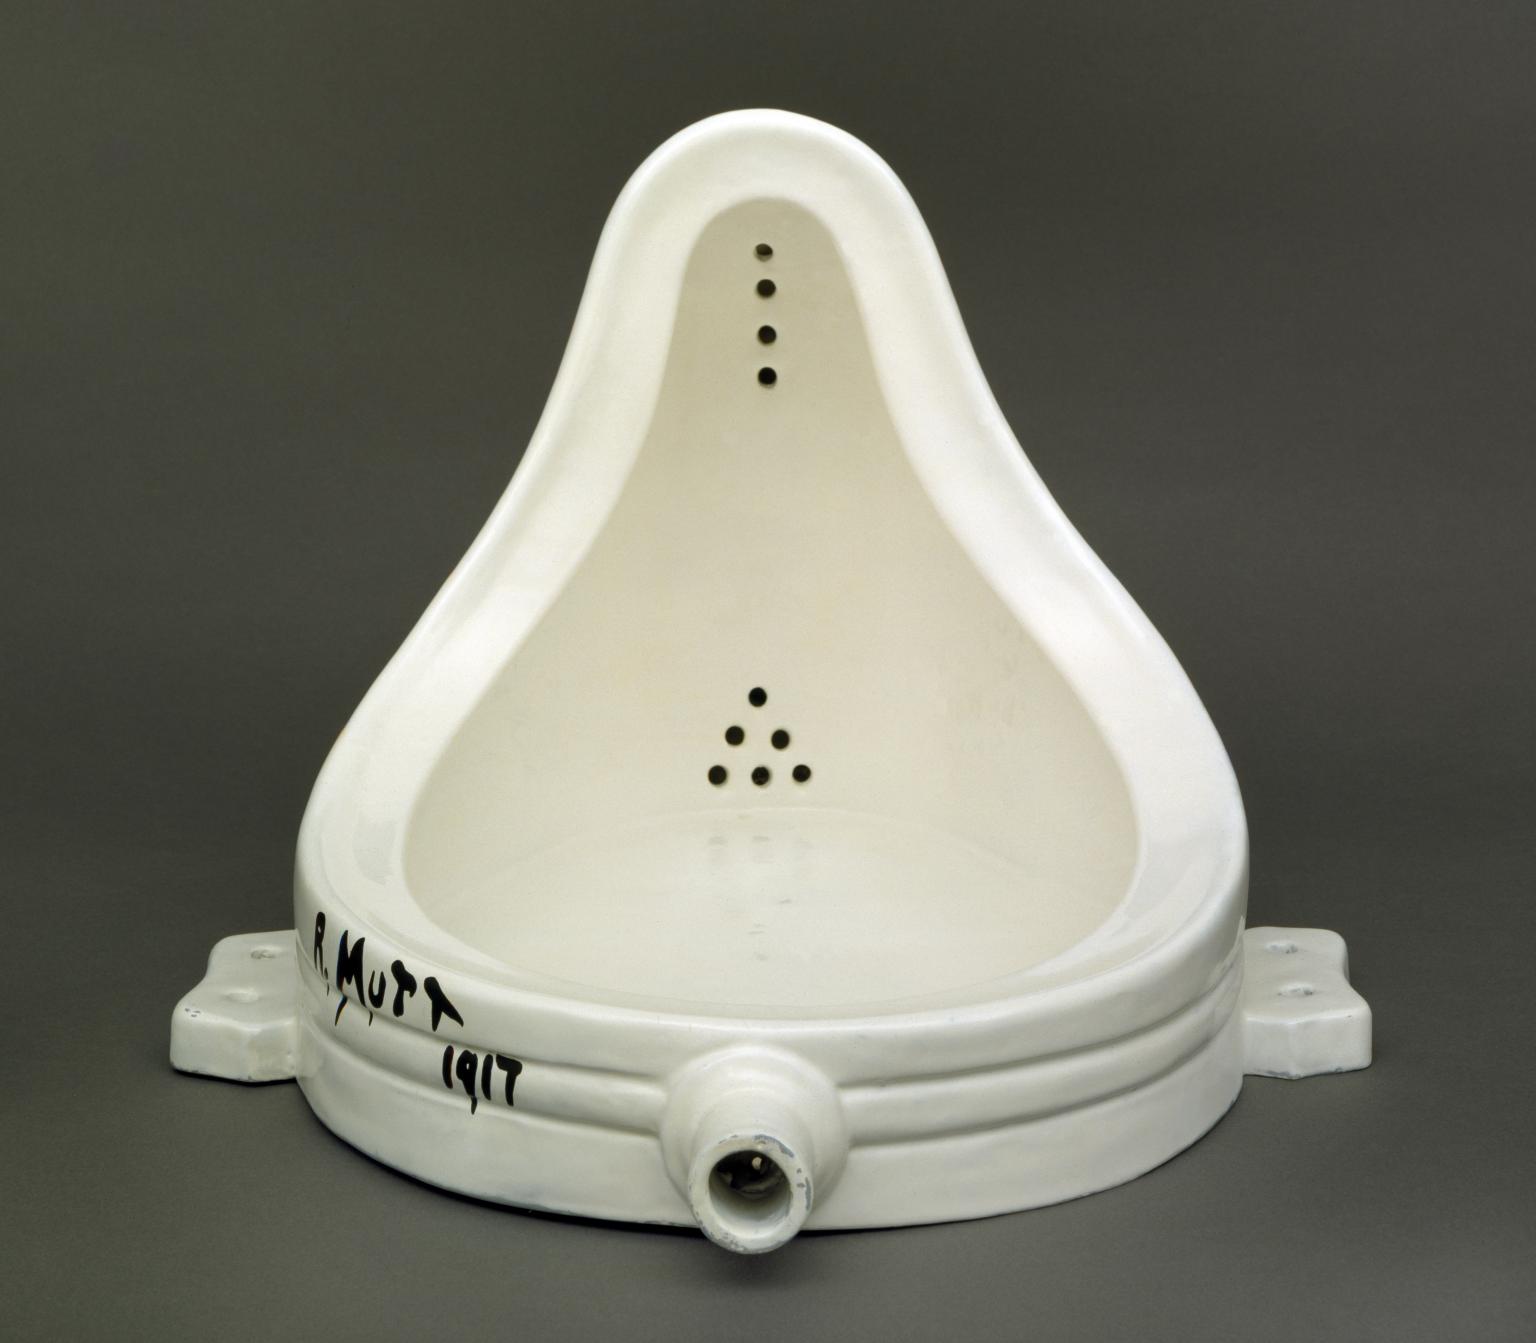 Marcel Duchamp, 'Fountain' 1917, replica 1964, urinal and black paint